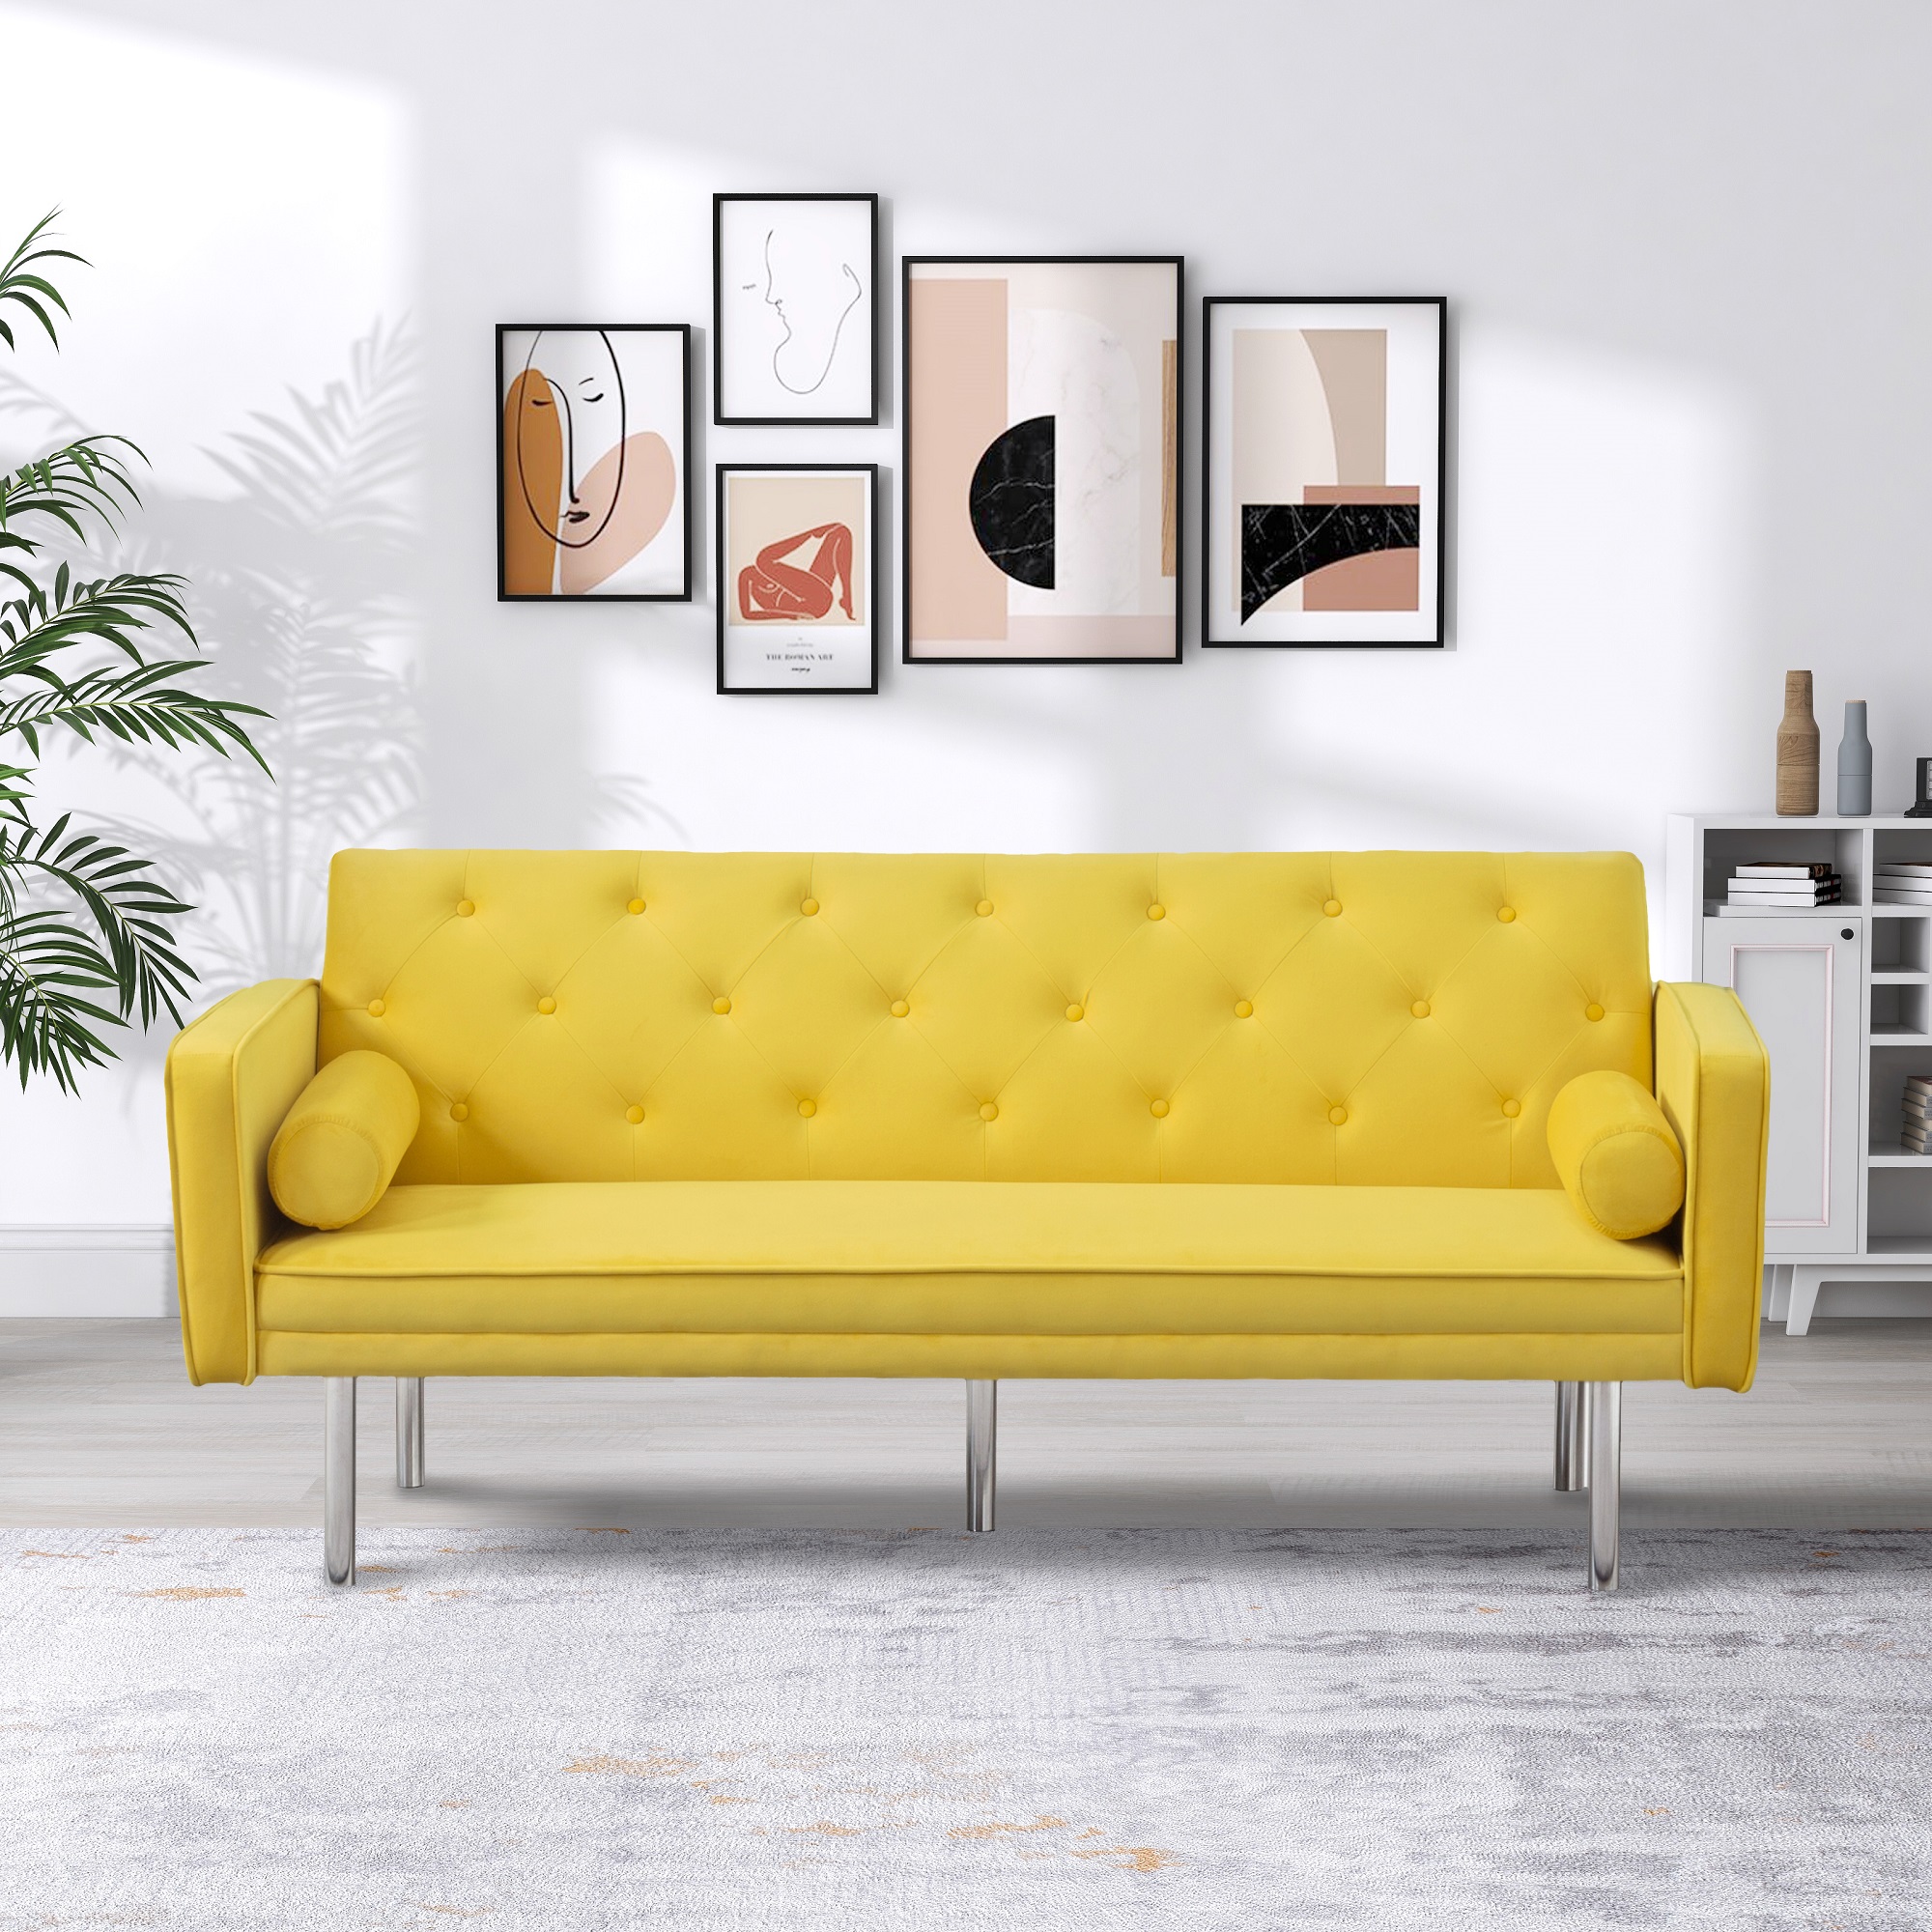 Modstyle Futon Sofa Bed, Velvet Convertible Sleeper Sofa with Pillows, Yellow - image 3 of 8